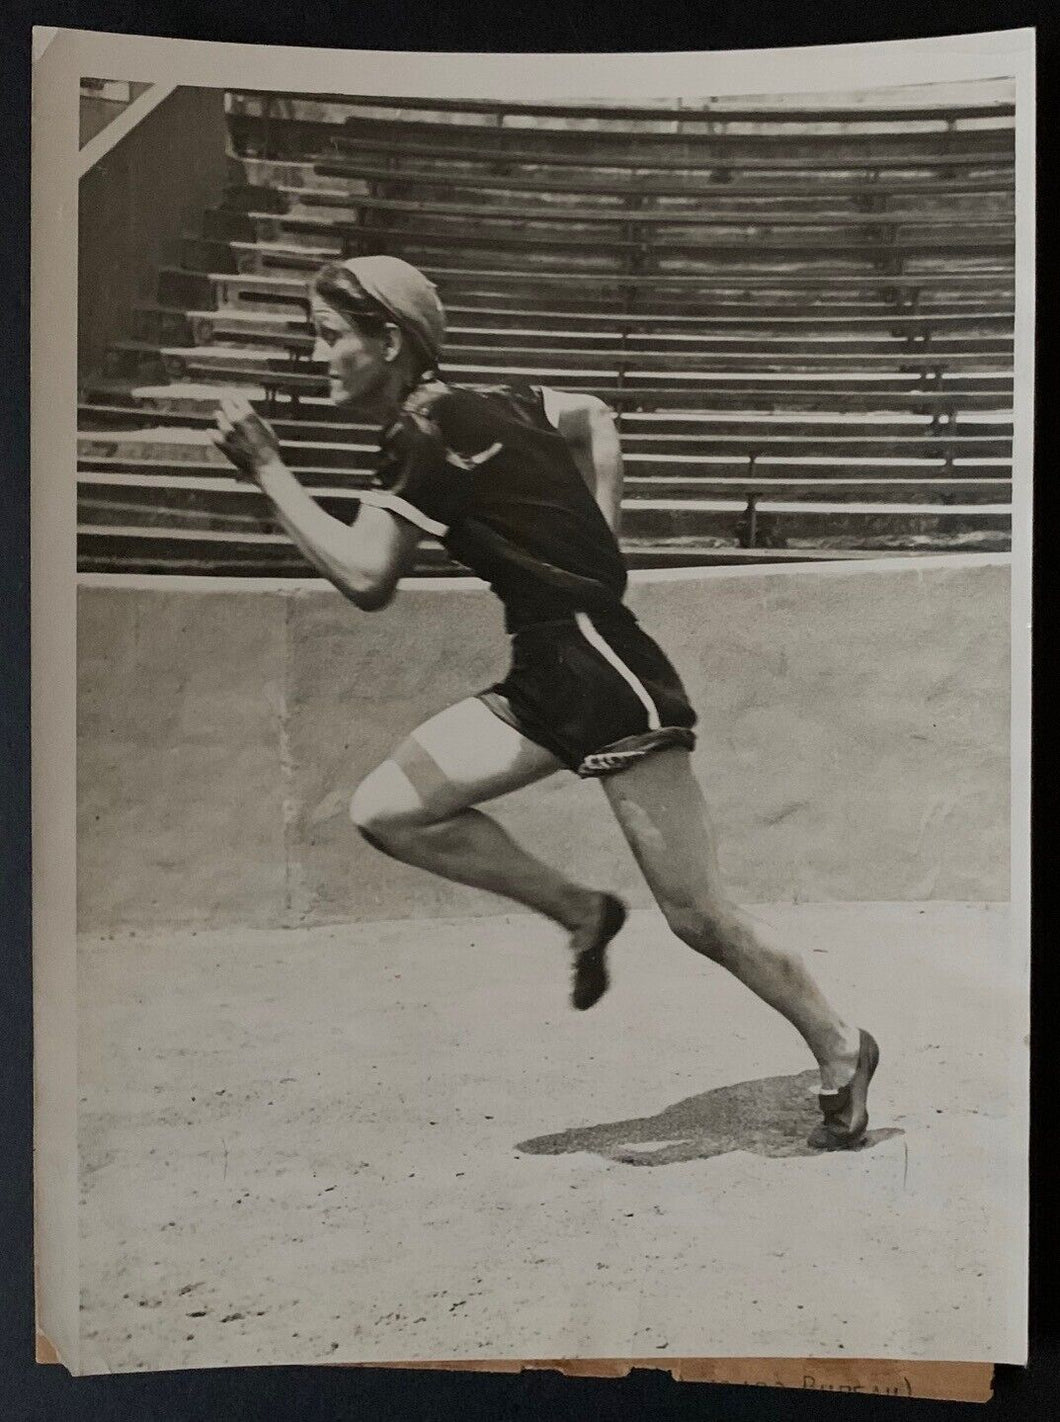 1932 Babe Didrikson “First Ever Ladies Sports Superstar” Vintage Acme Photo